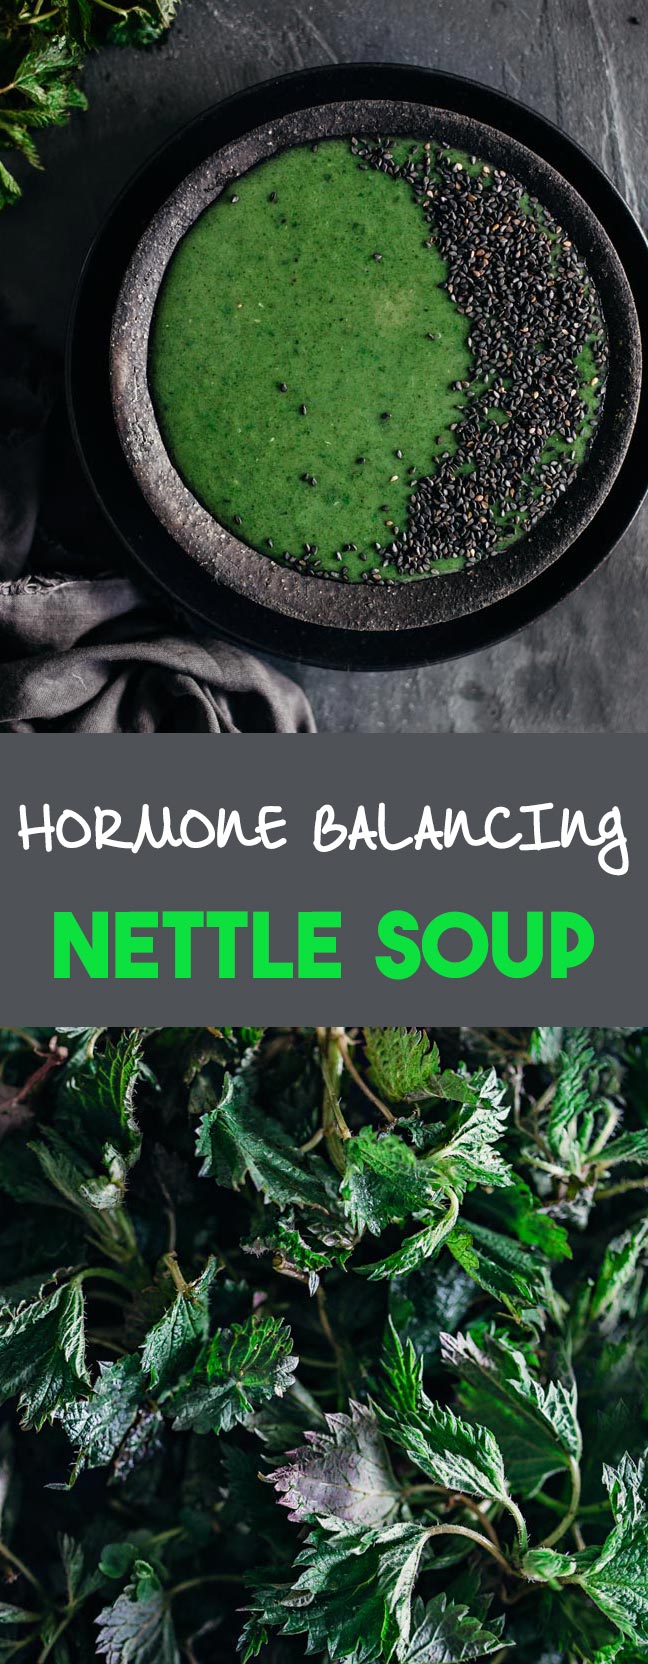 Creamy green nettle soup for hormone balance and spring detox #vegan | TheAwesomeGreen.com